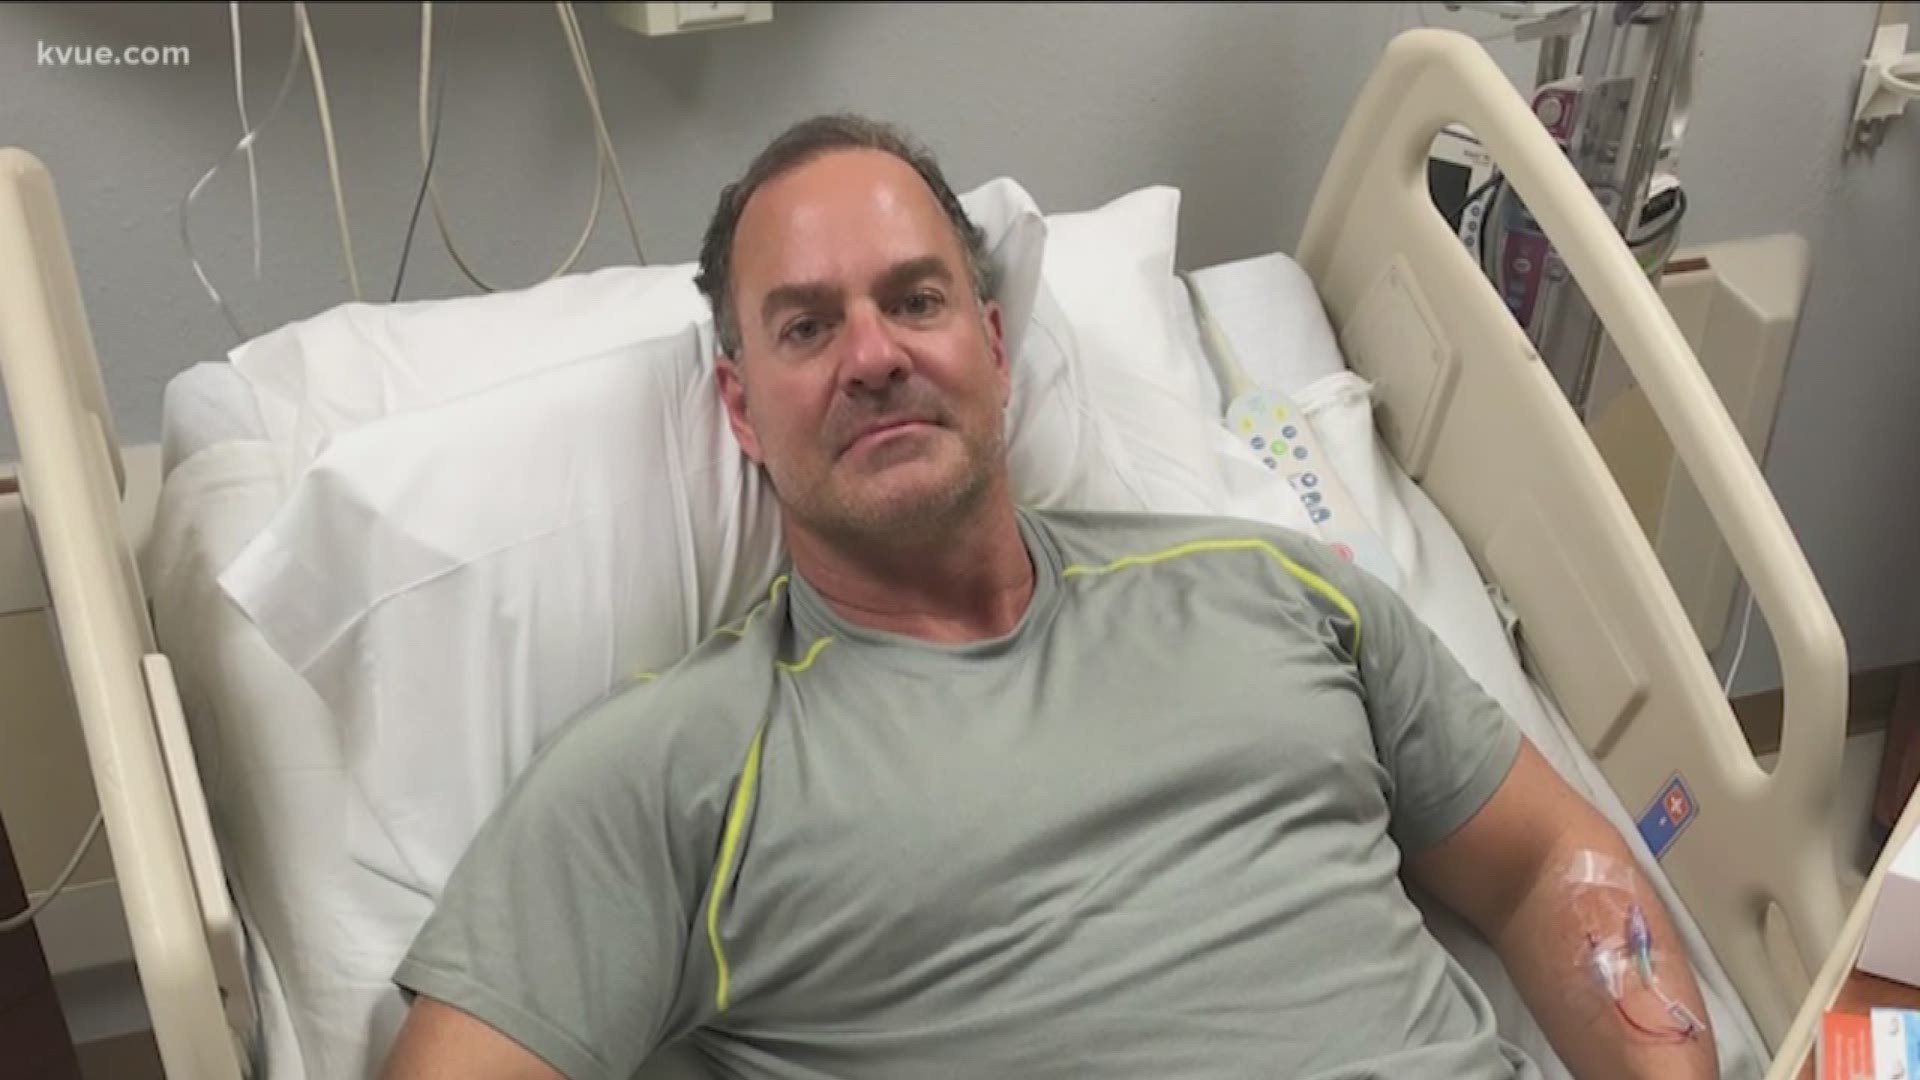 What a Central Texas man thought was a pulled muscle turned out to be a rare bacterium.